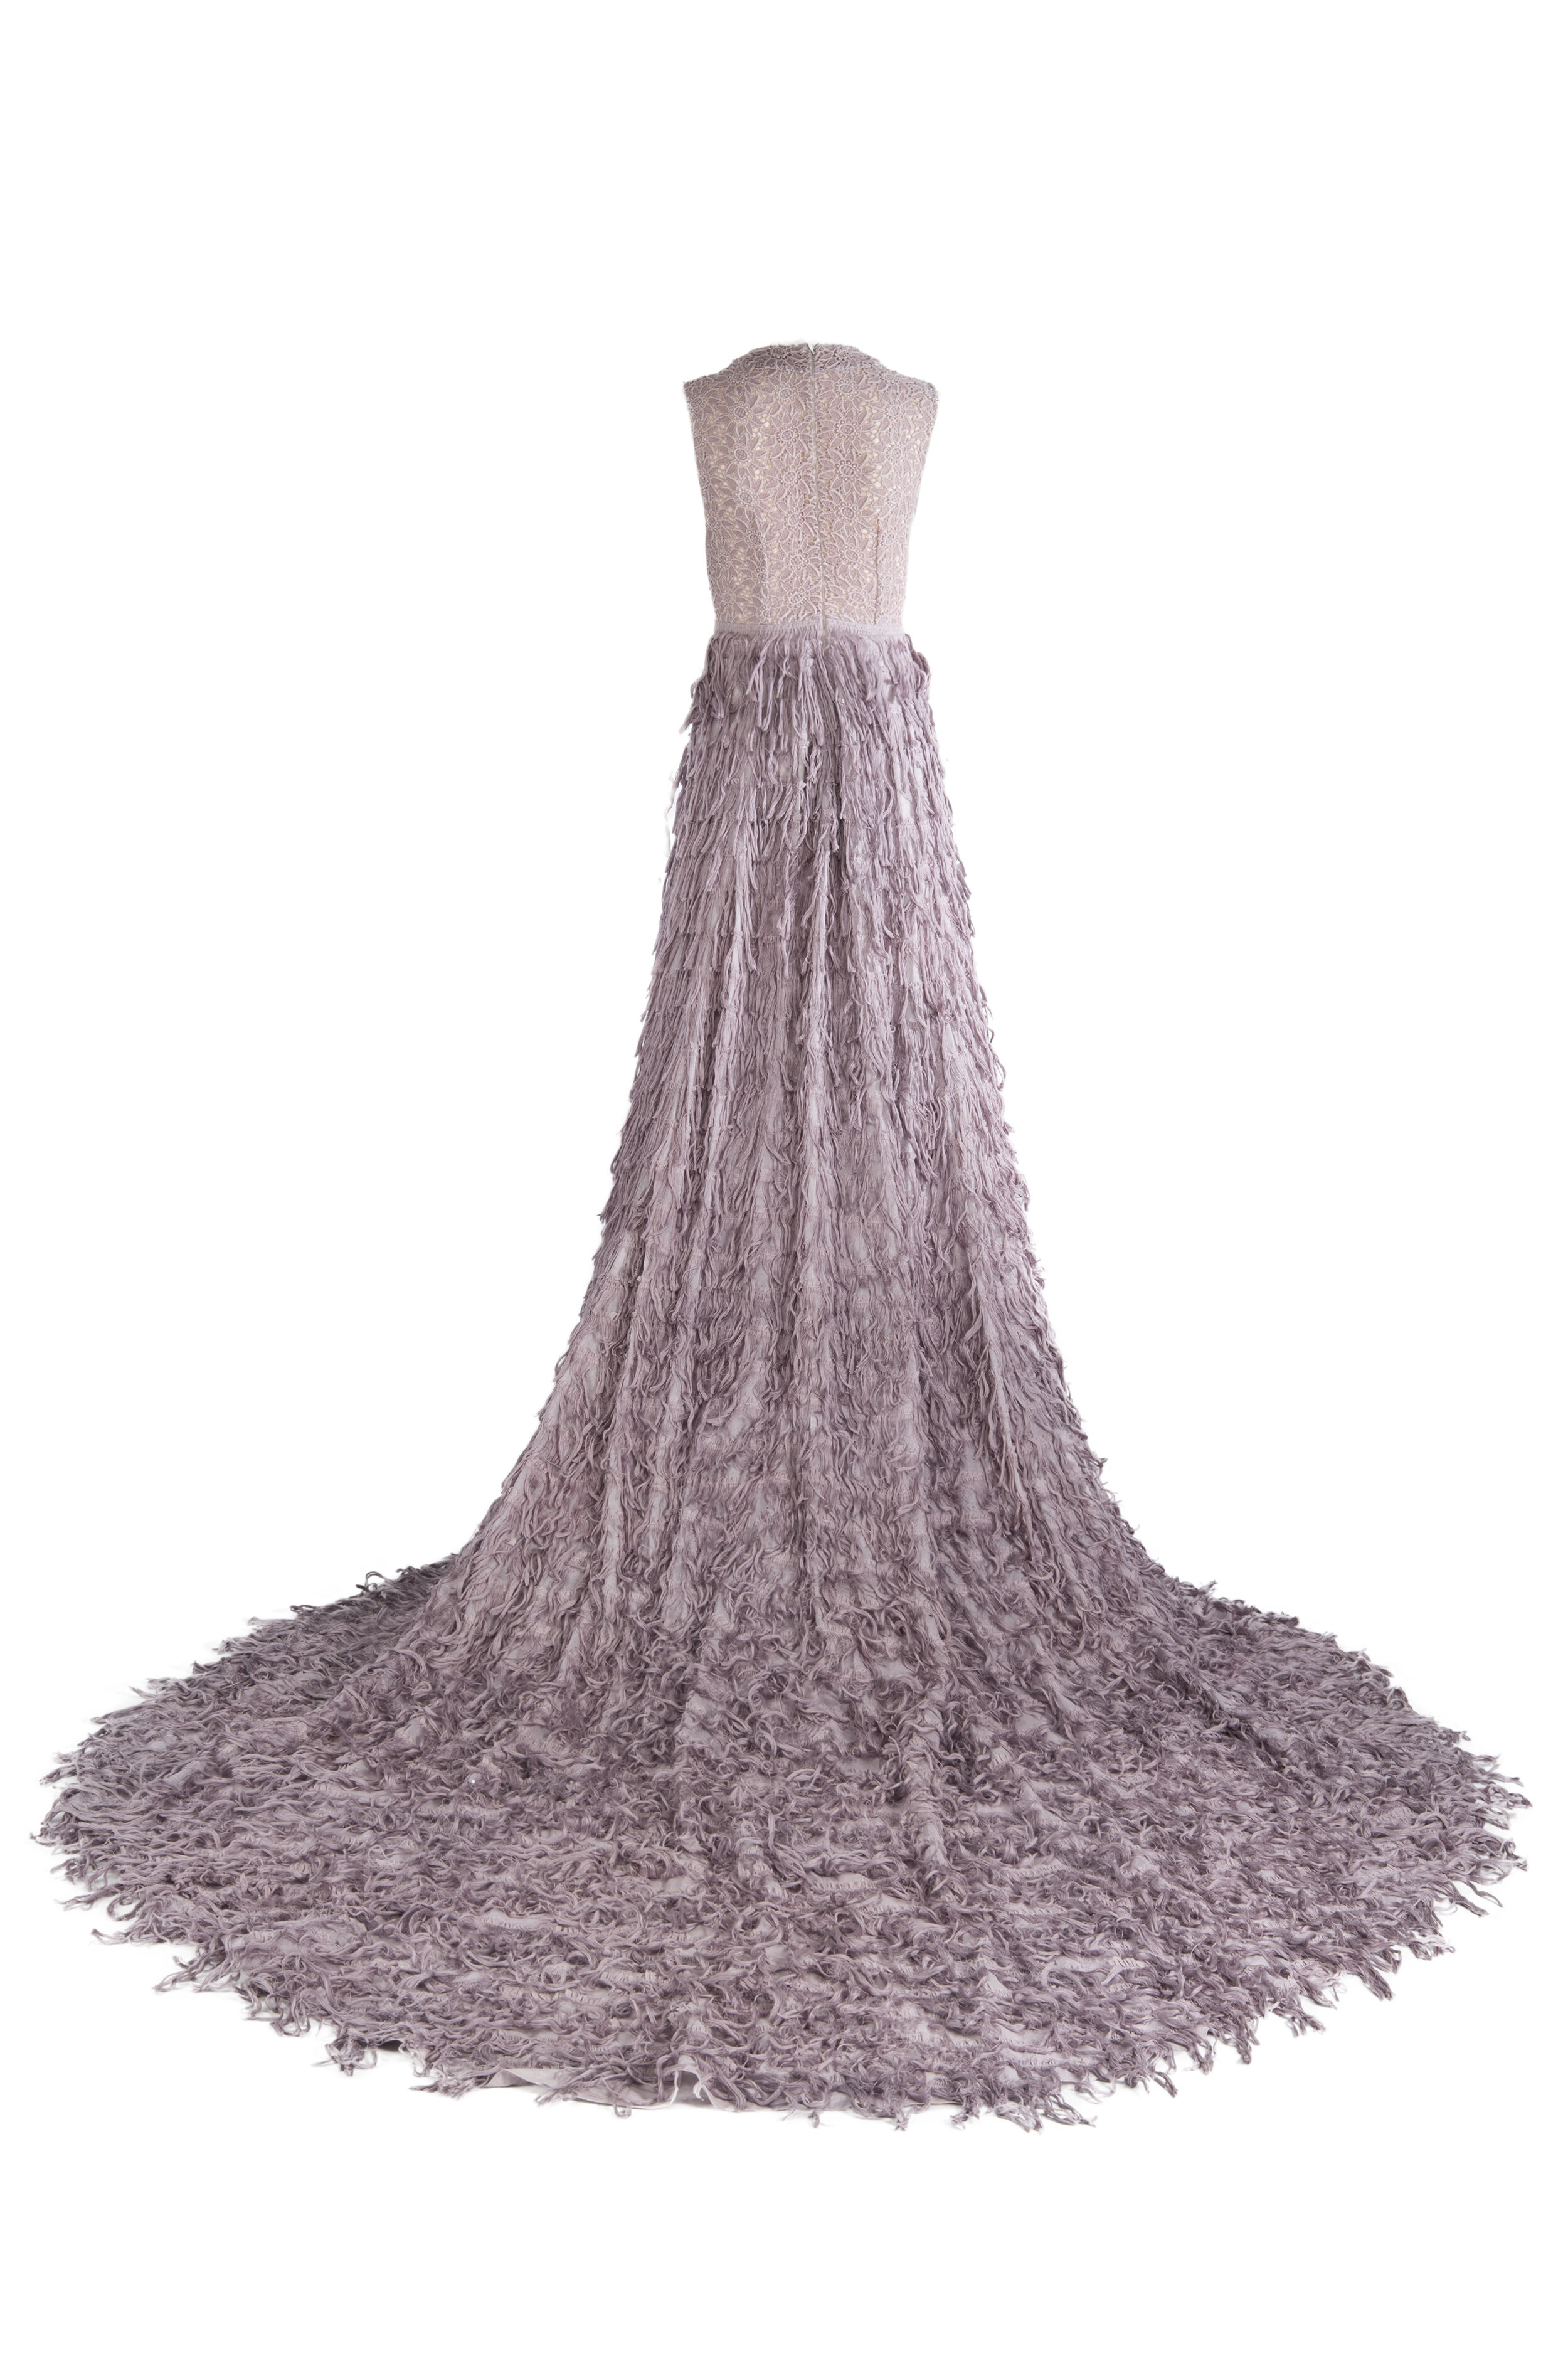 Back View of Mauve Floor Length Gown